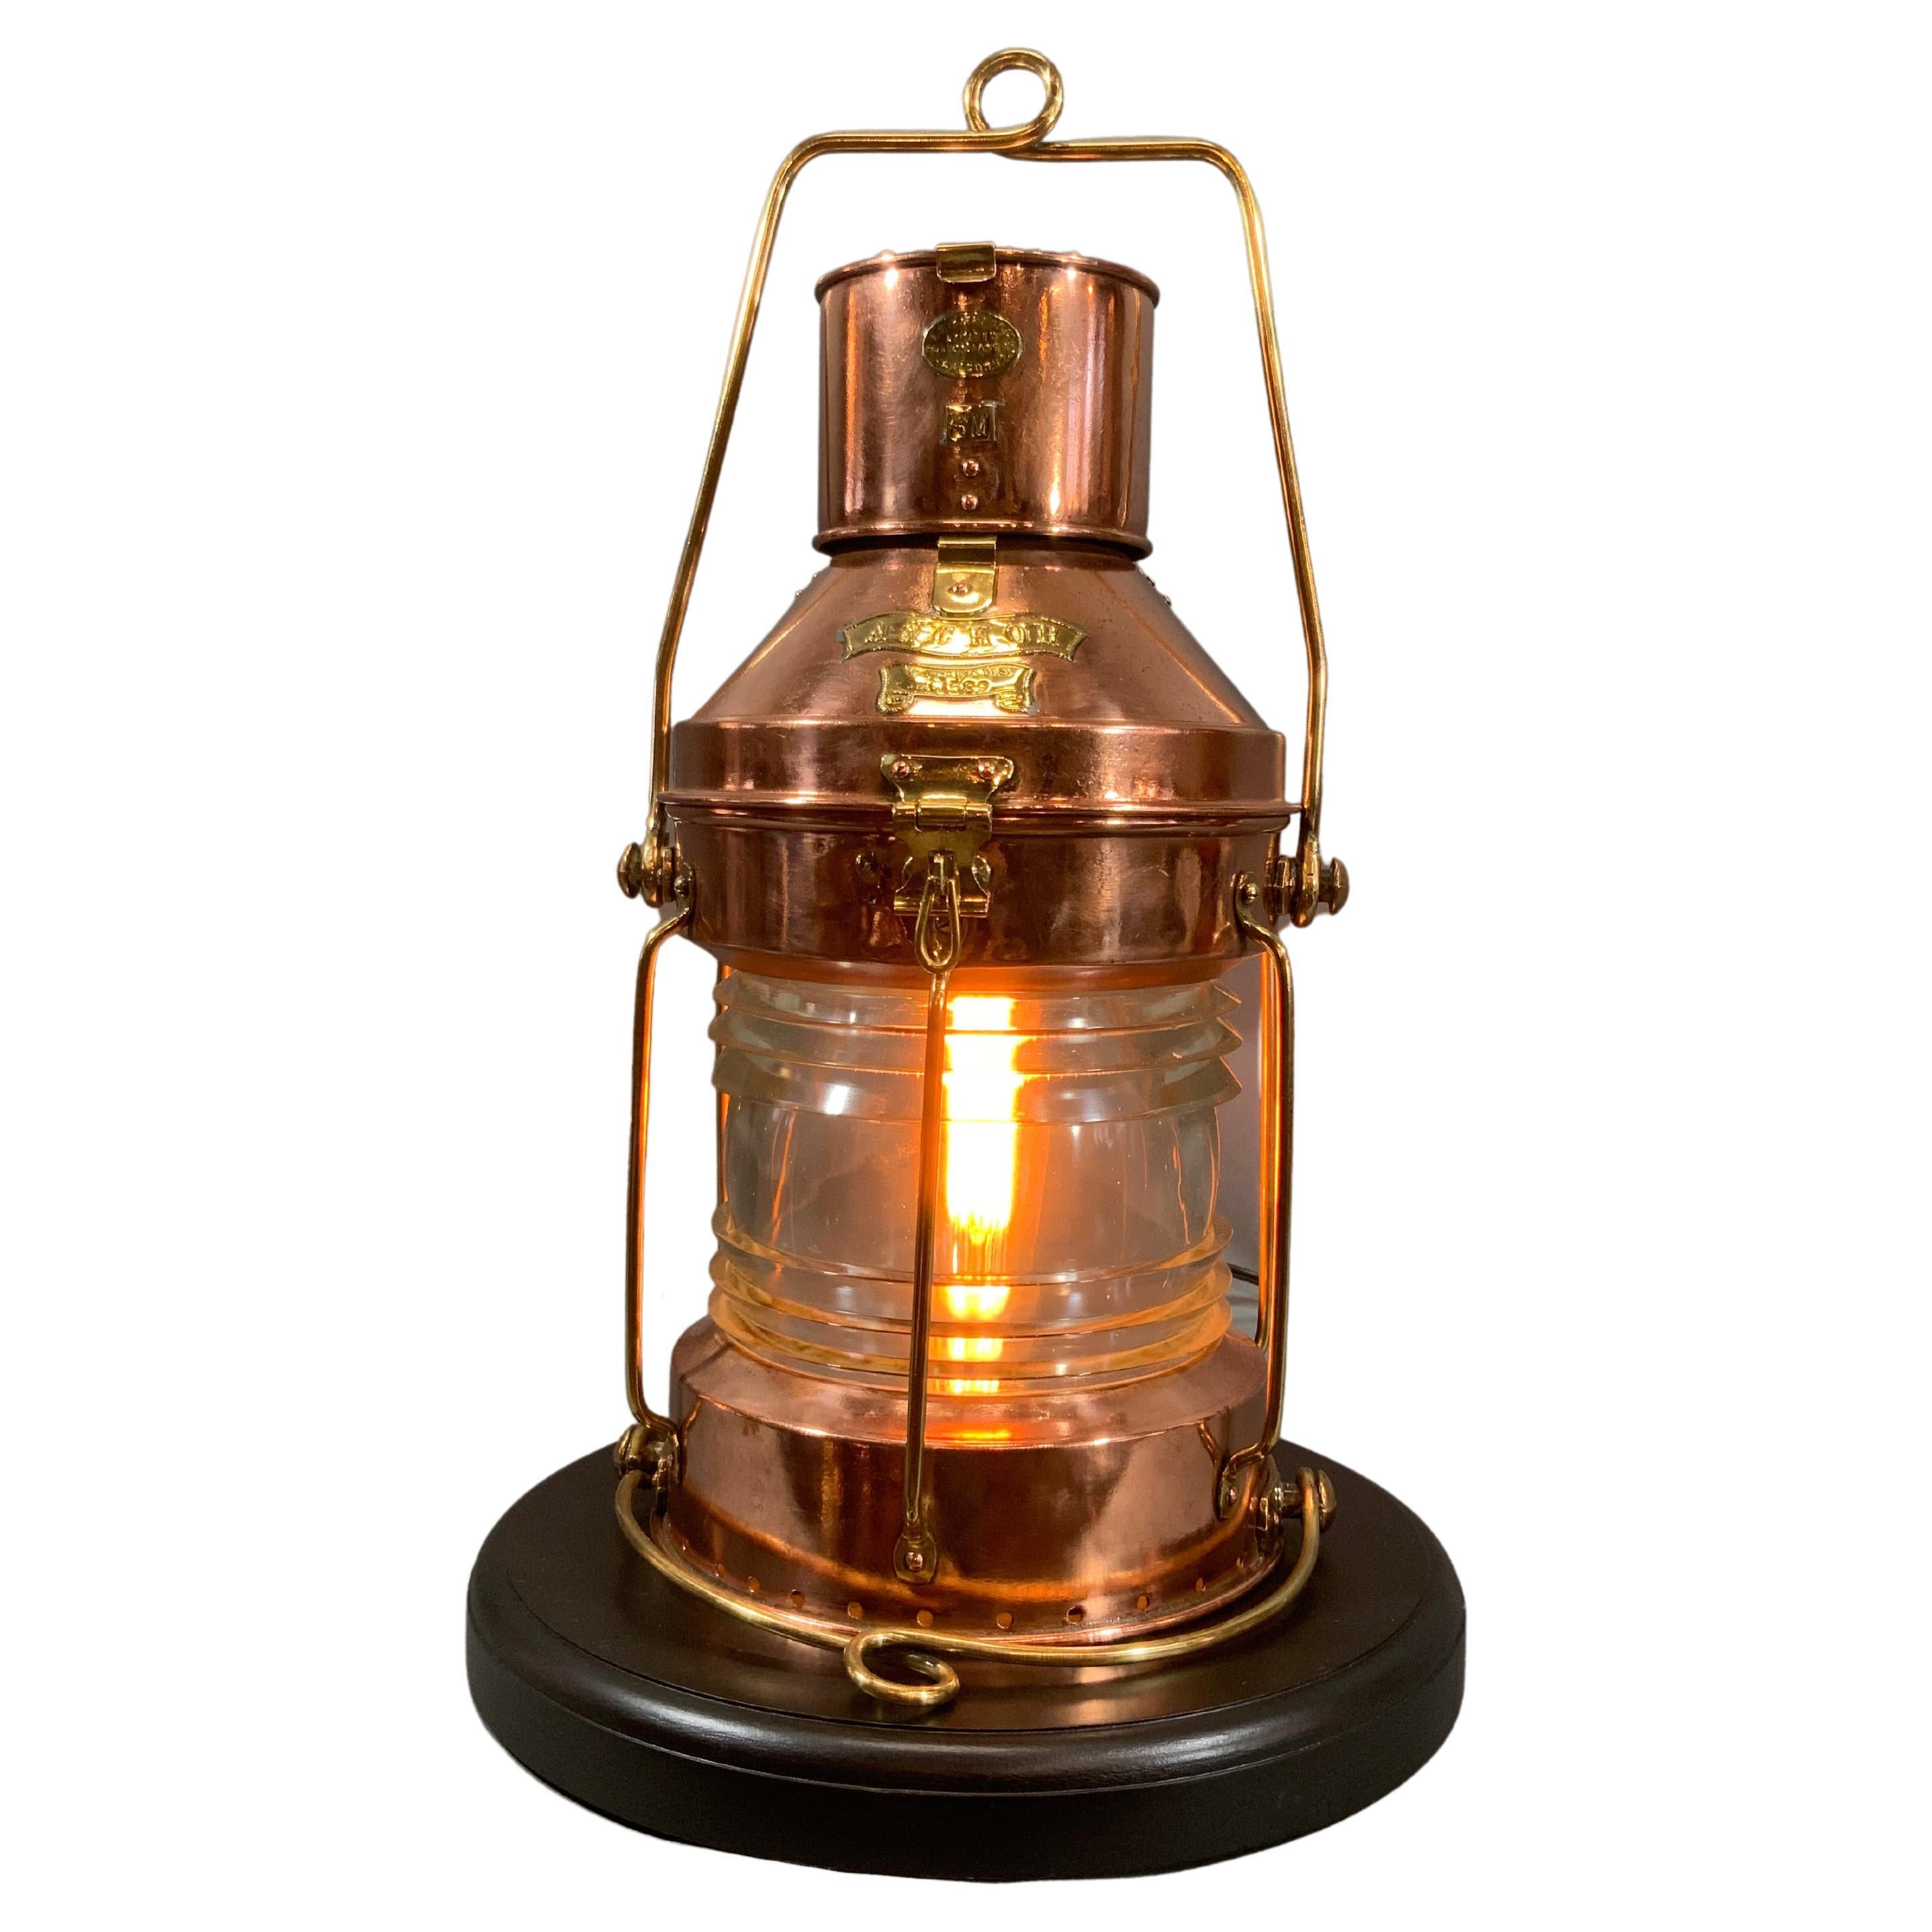 Copper Ship's Anchor Lantern by British Maker RC Murray